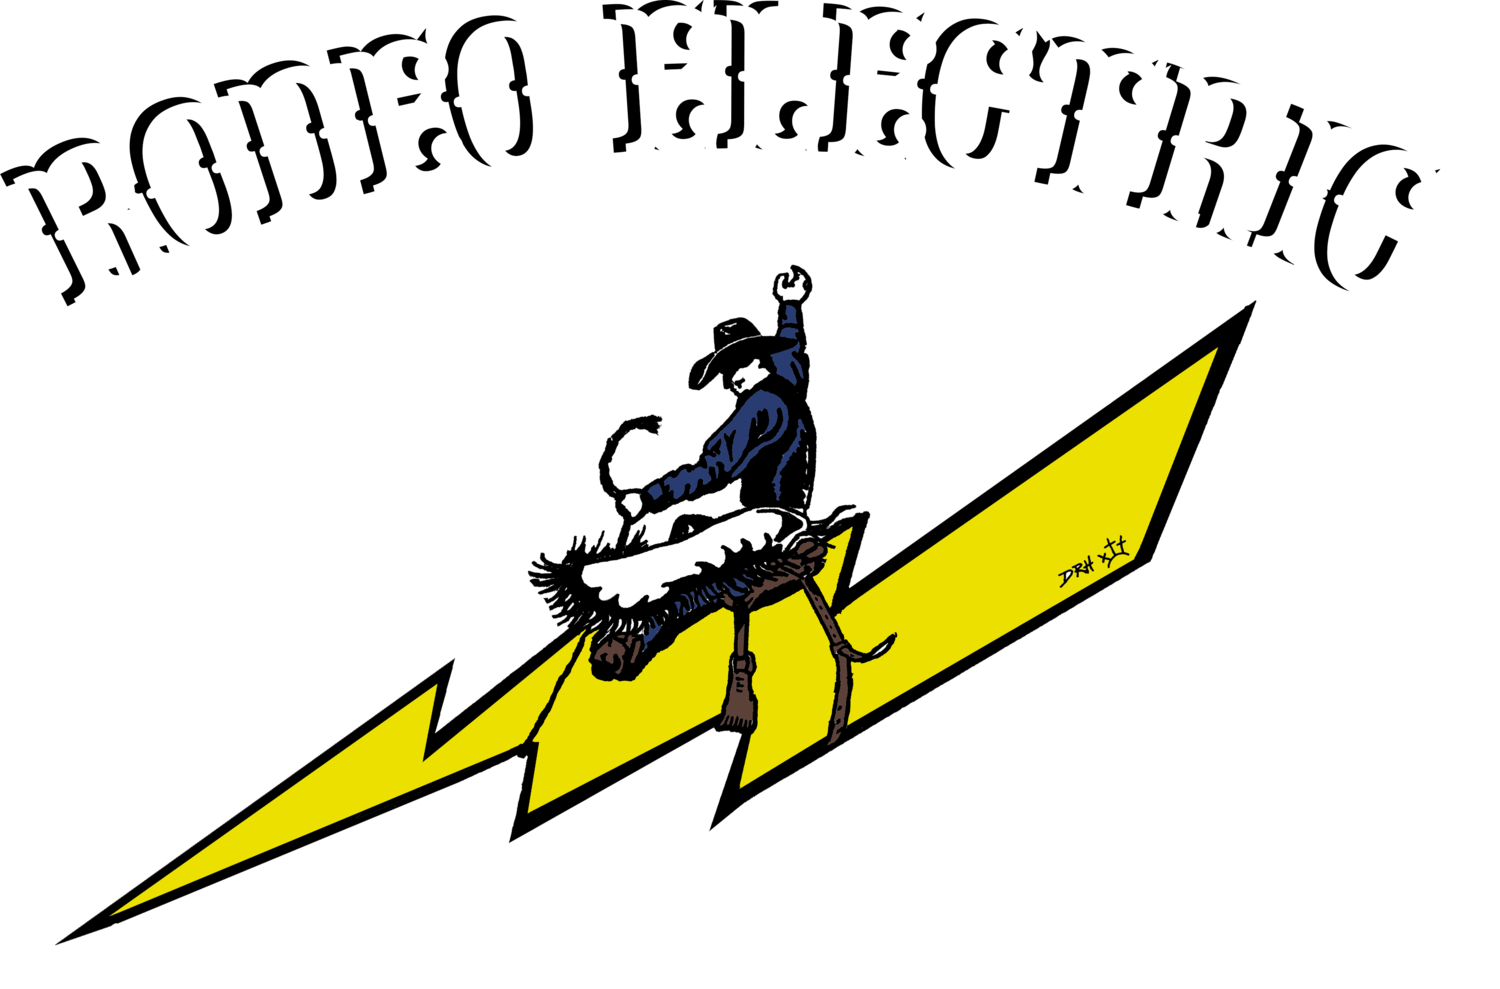 The Rodeo Electric